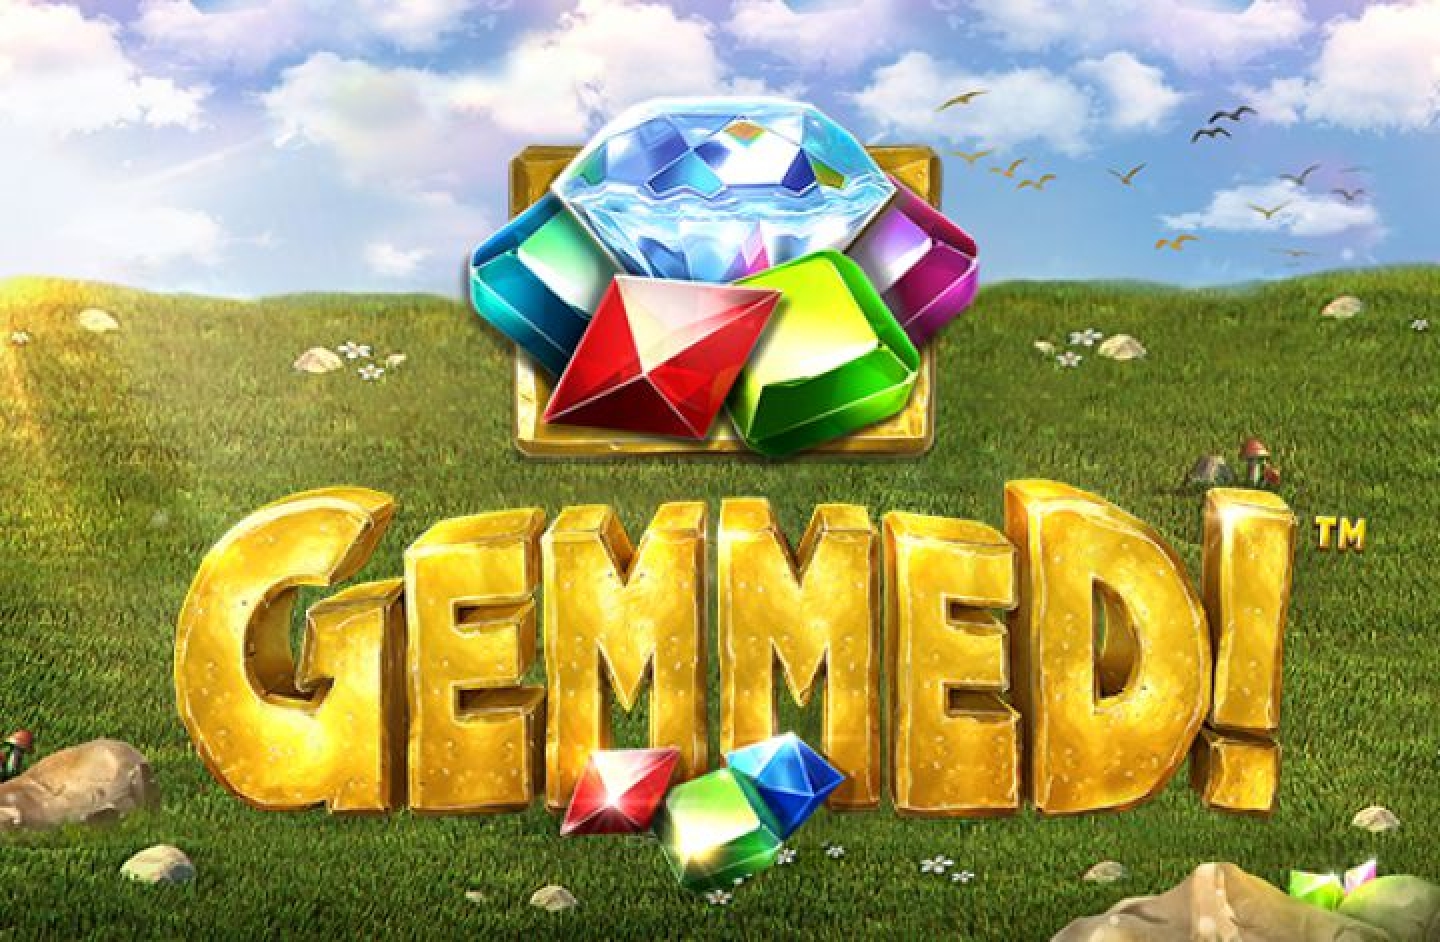 The Gemmed! Online Slot Demo Game by Betsoft